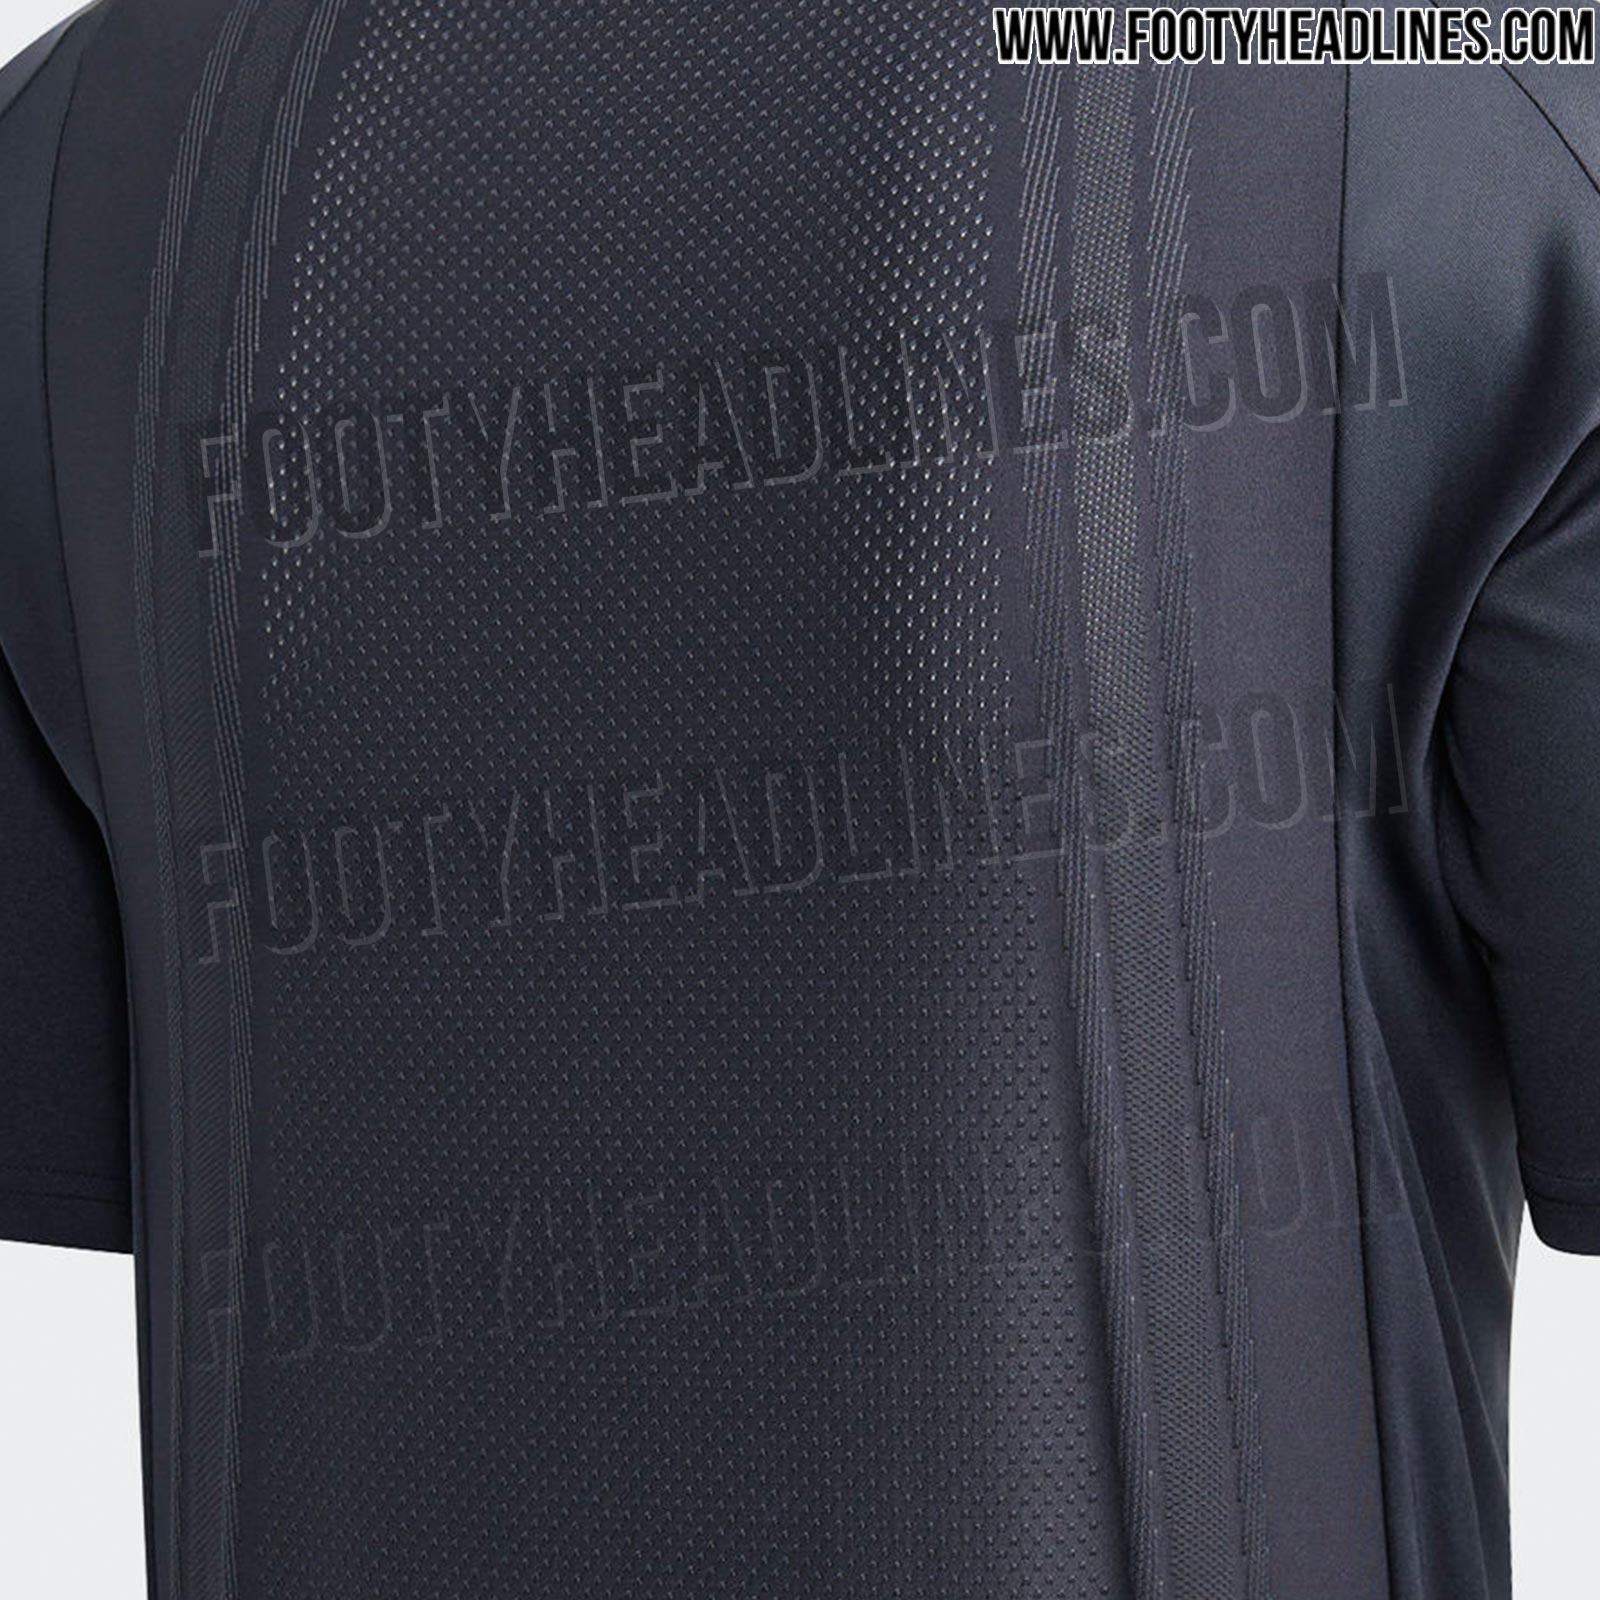 All-New Adidas Template | Manchester United 19-20 Europa League ...